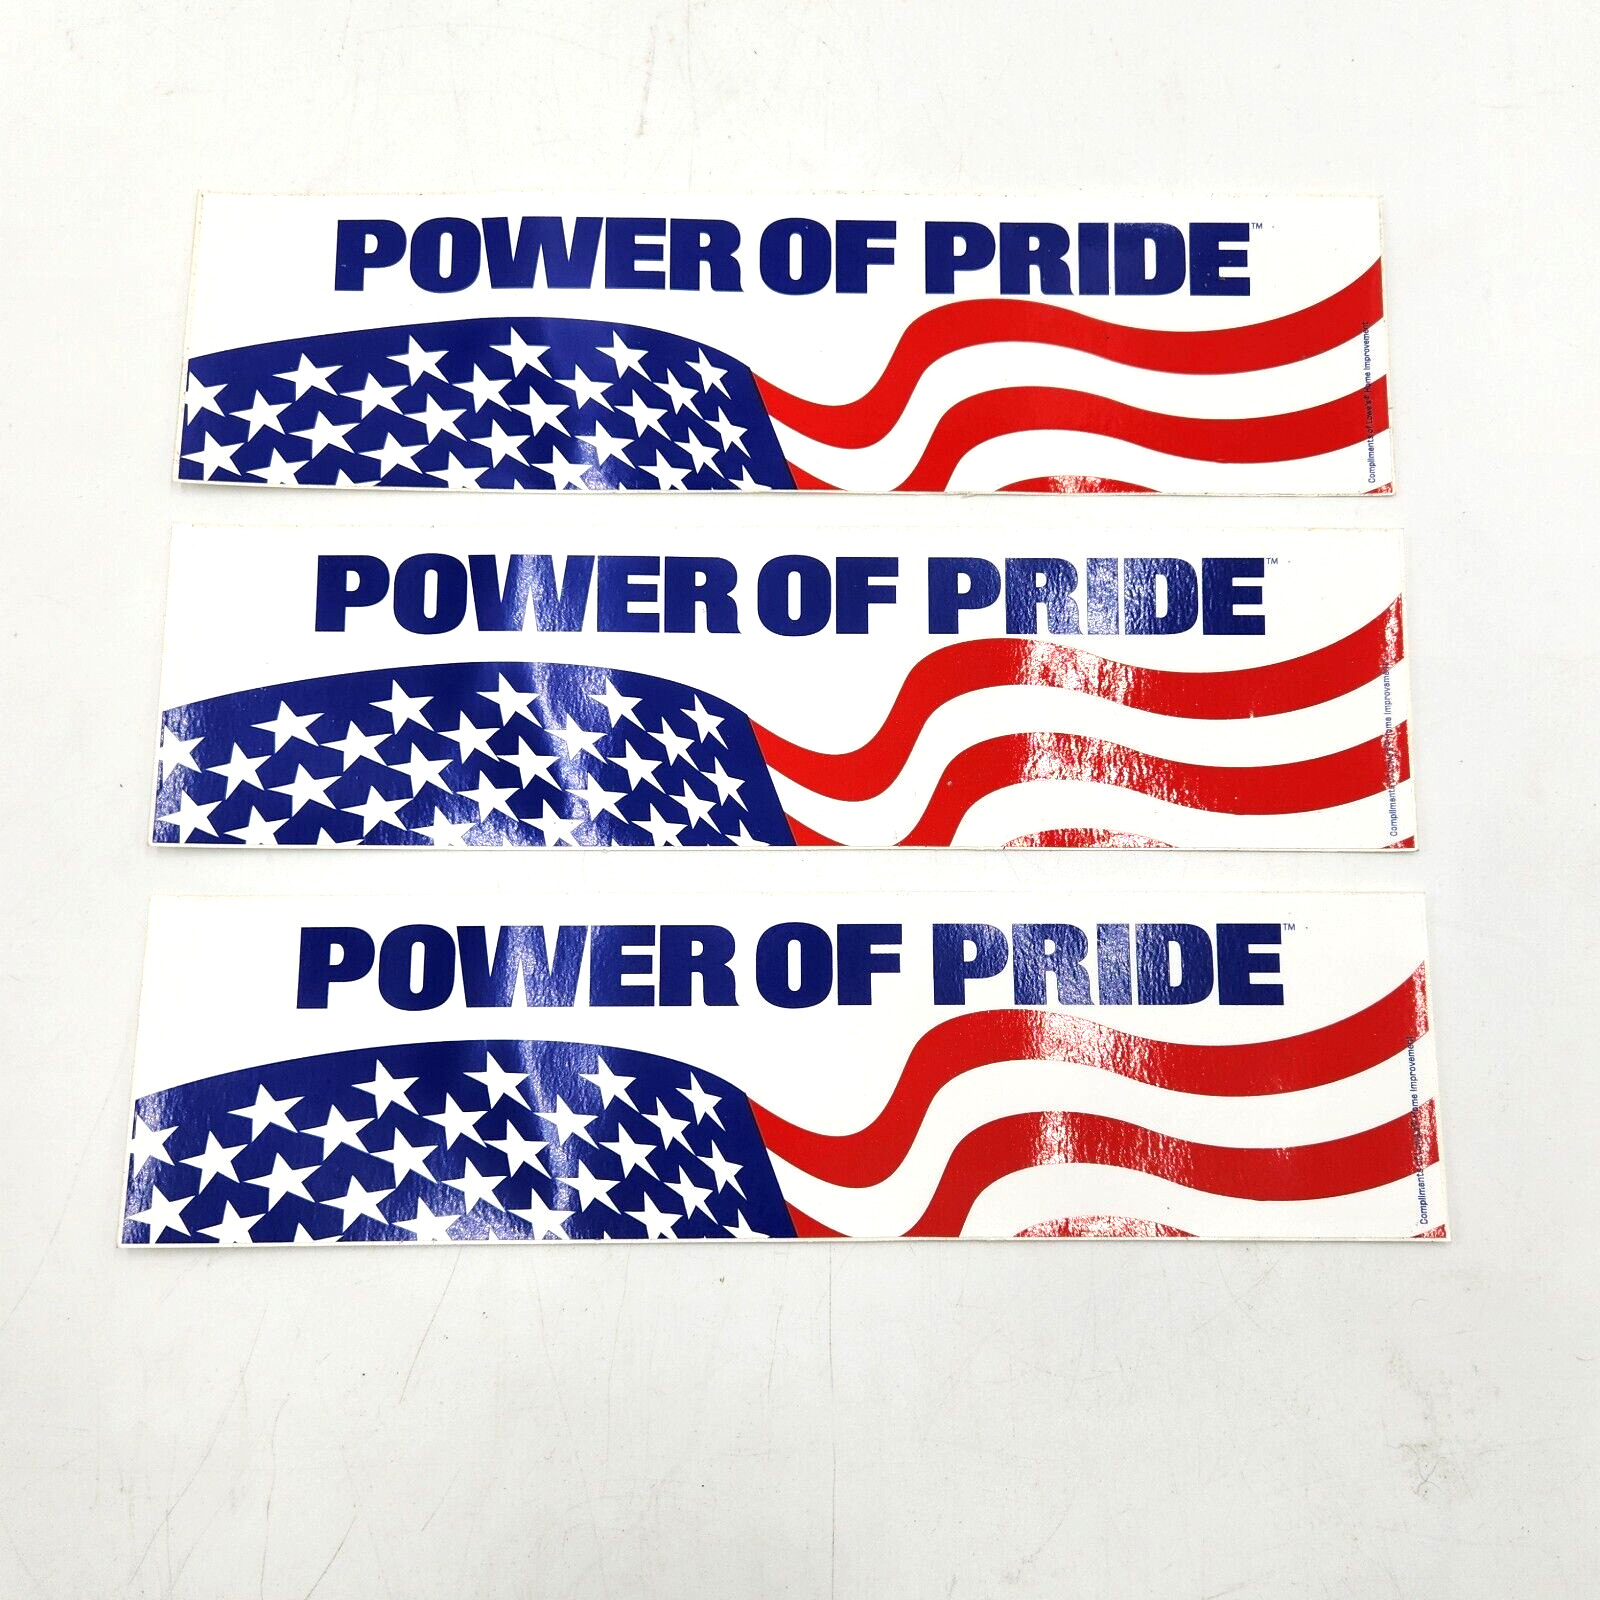 (3) VTG 1990's Power of Pride USA American Flag Bumper Stickers Lowes